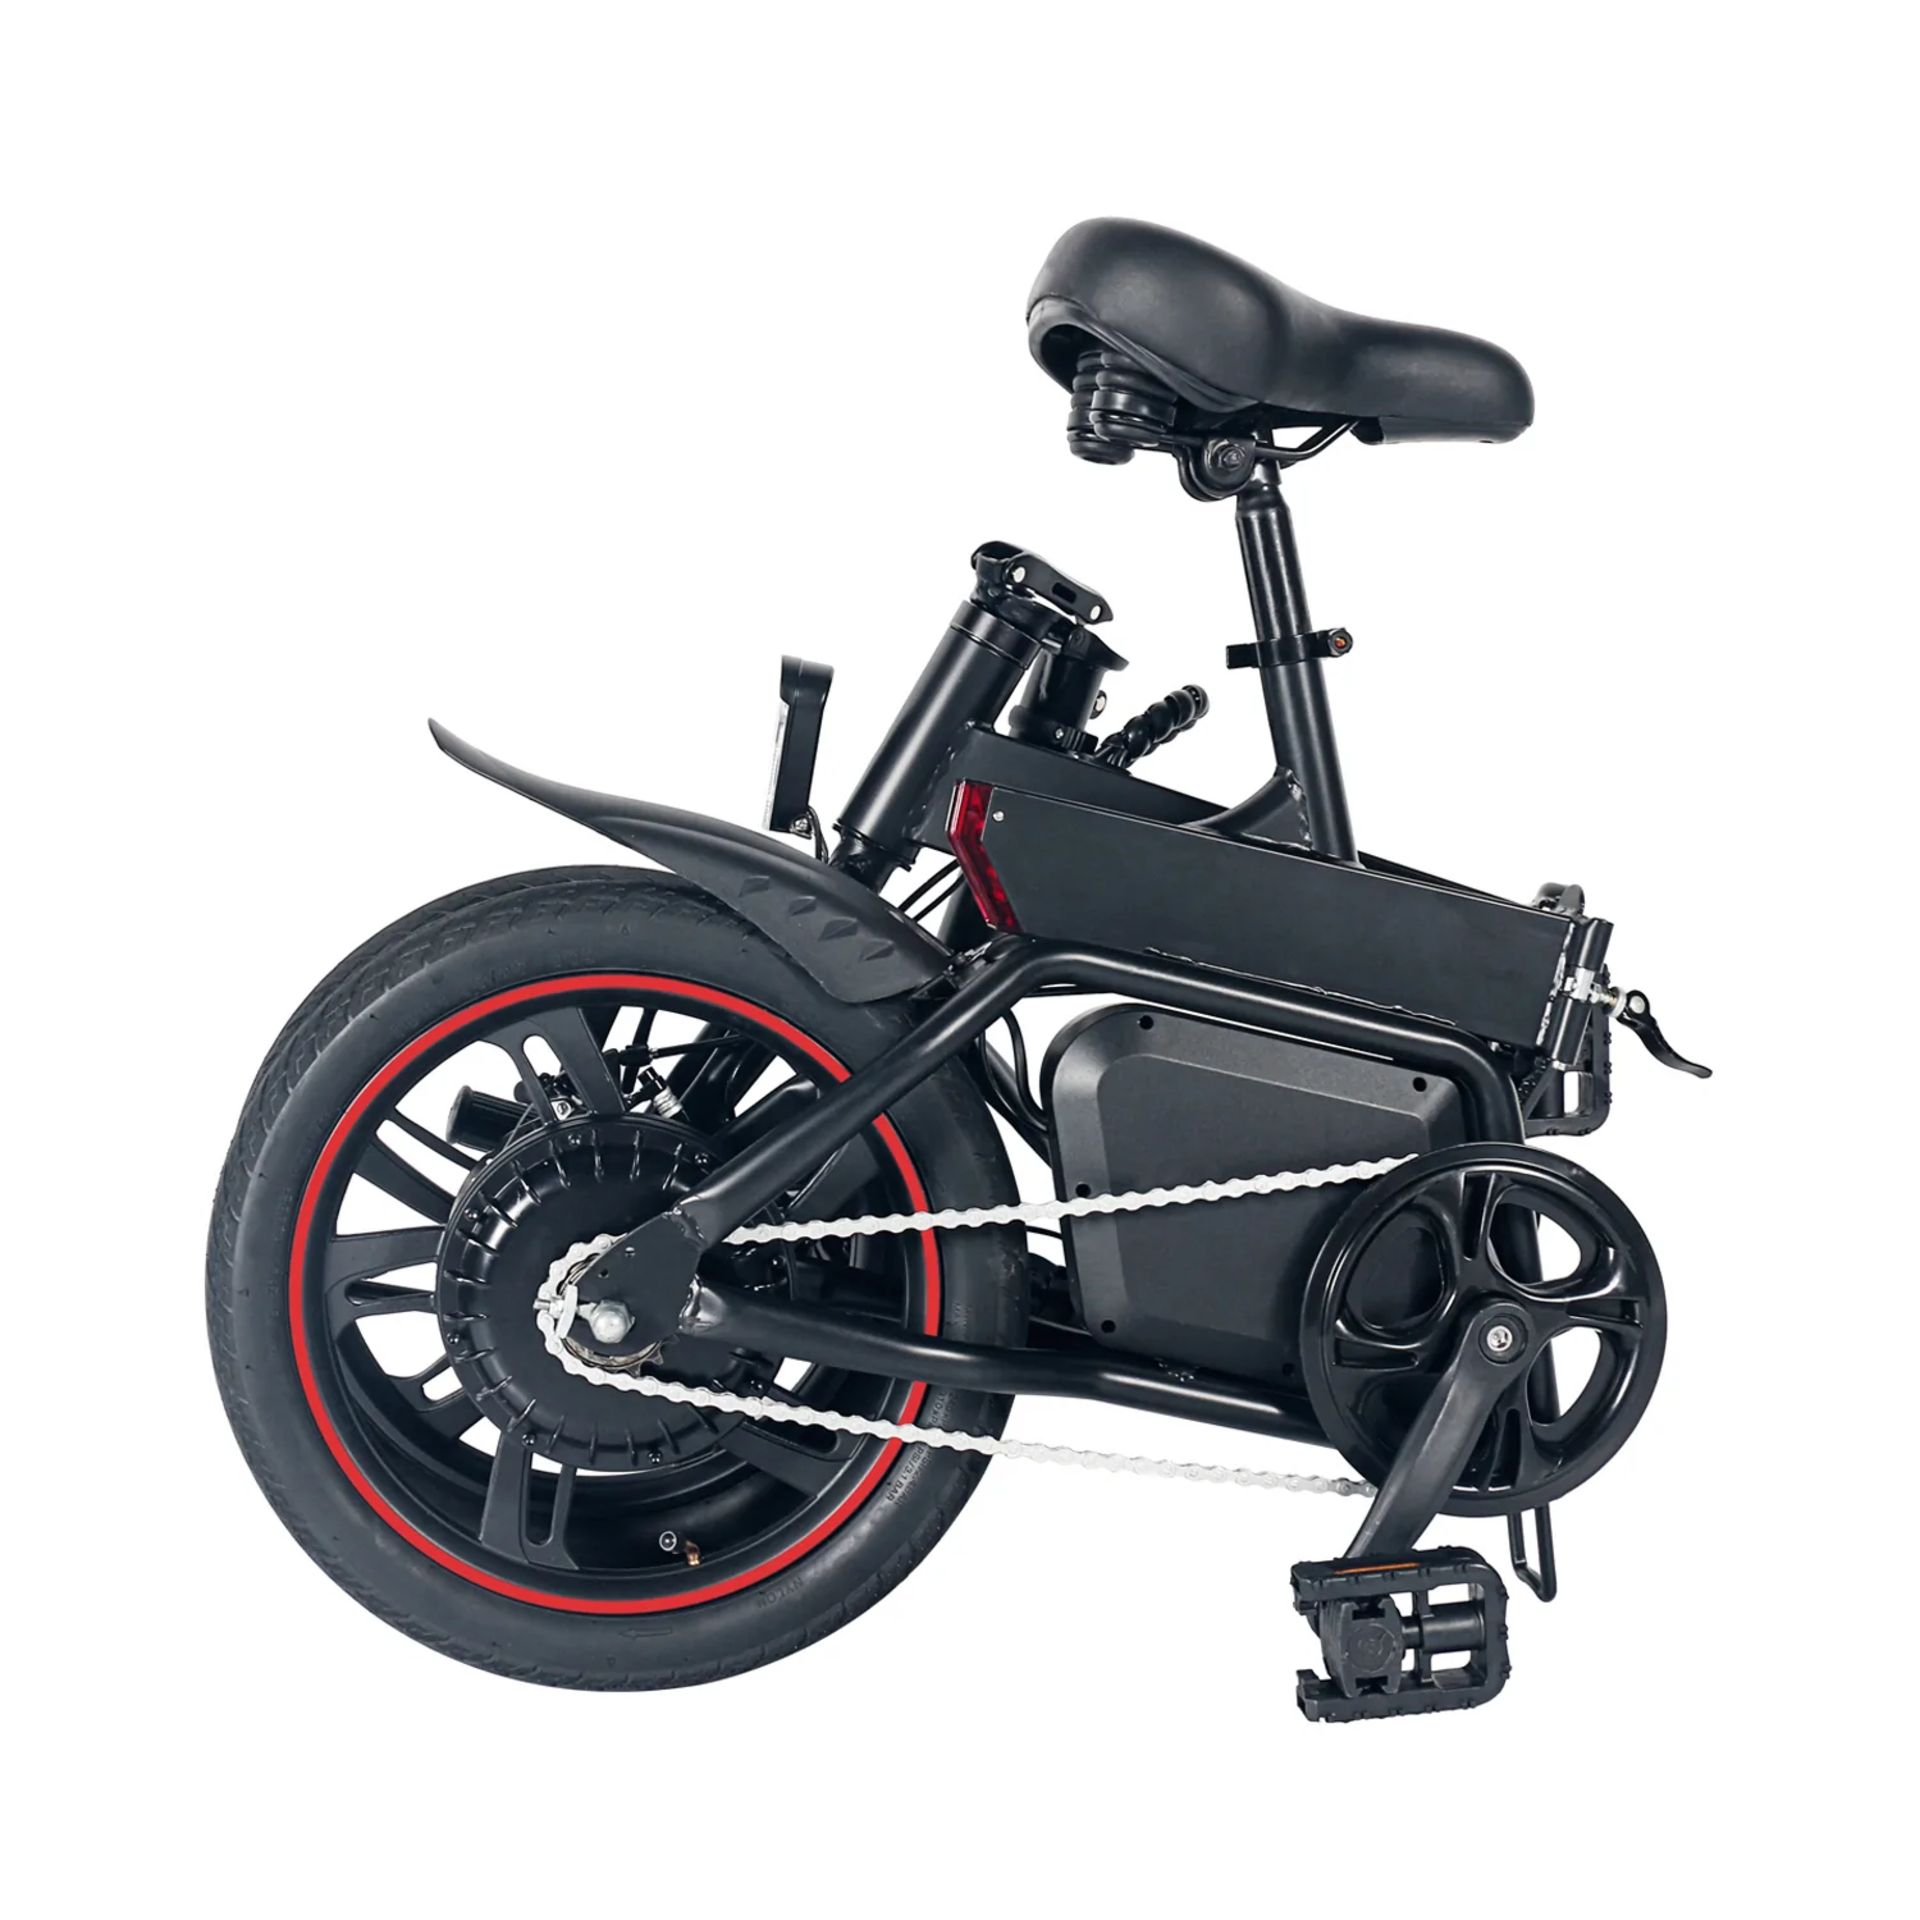 5 X Windgoo B20 Pro Electric Bike. RRP £1,100.99. With 16-inch-wide tires and a frame of upgraded - Bild 2 aus 7